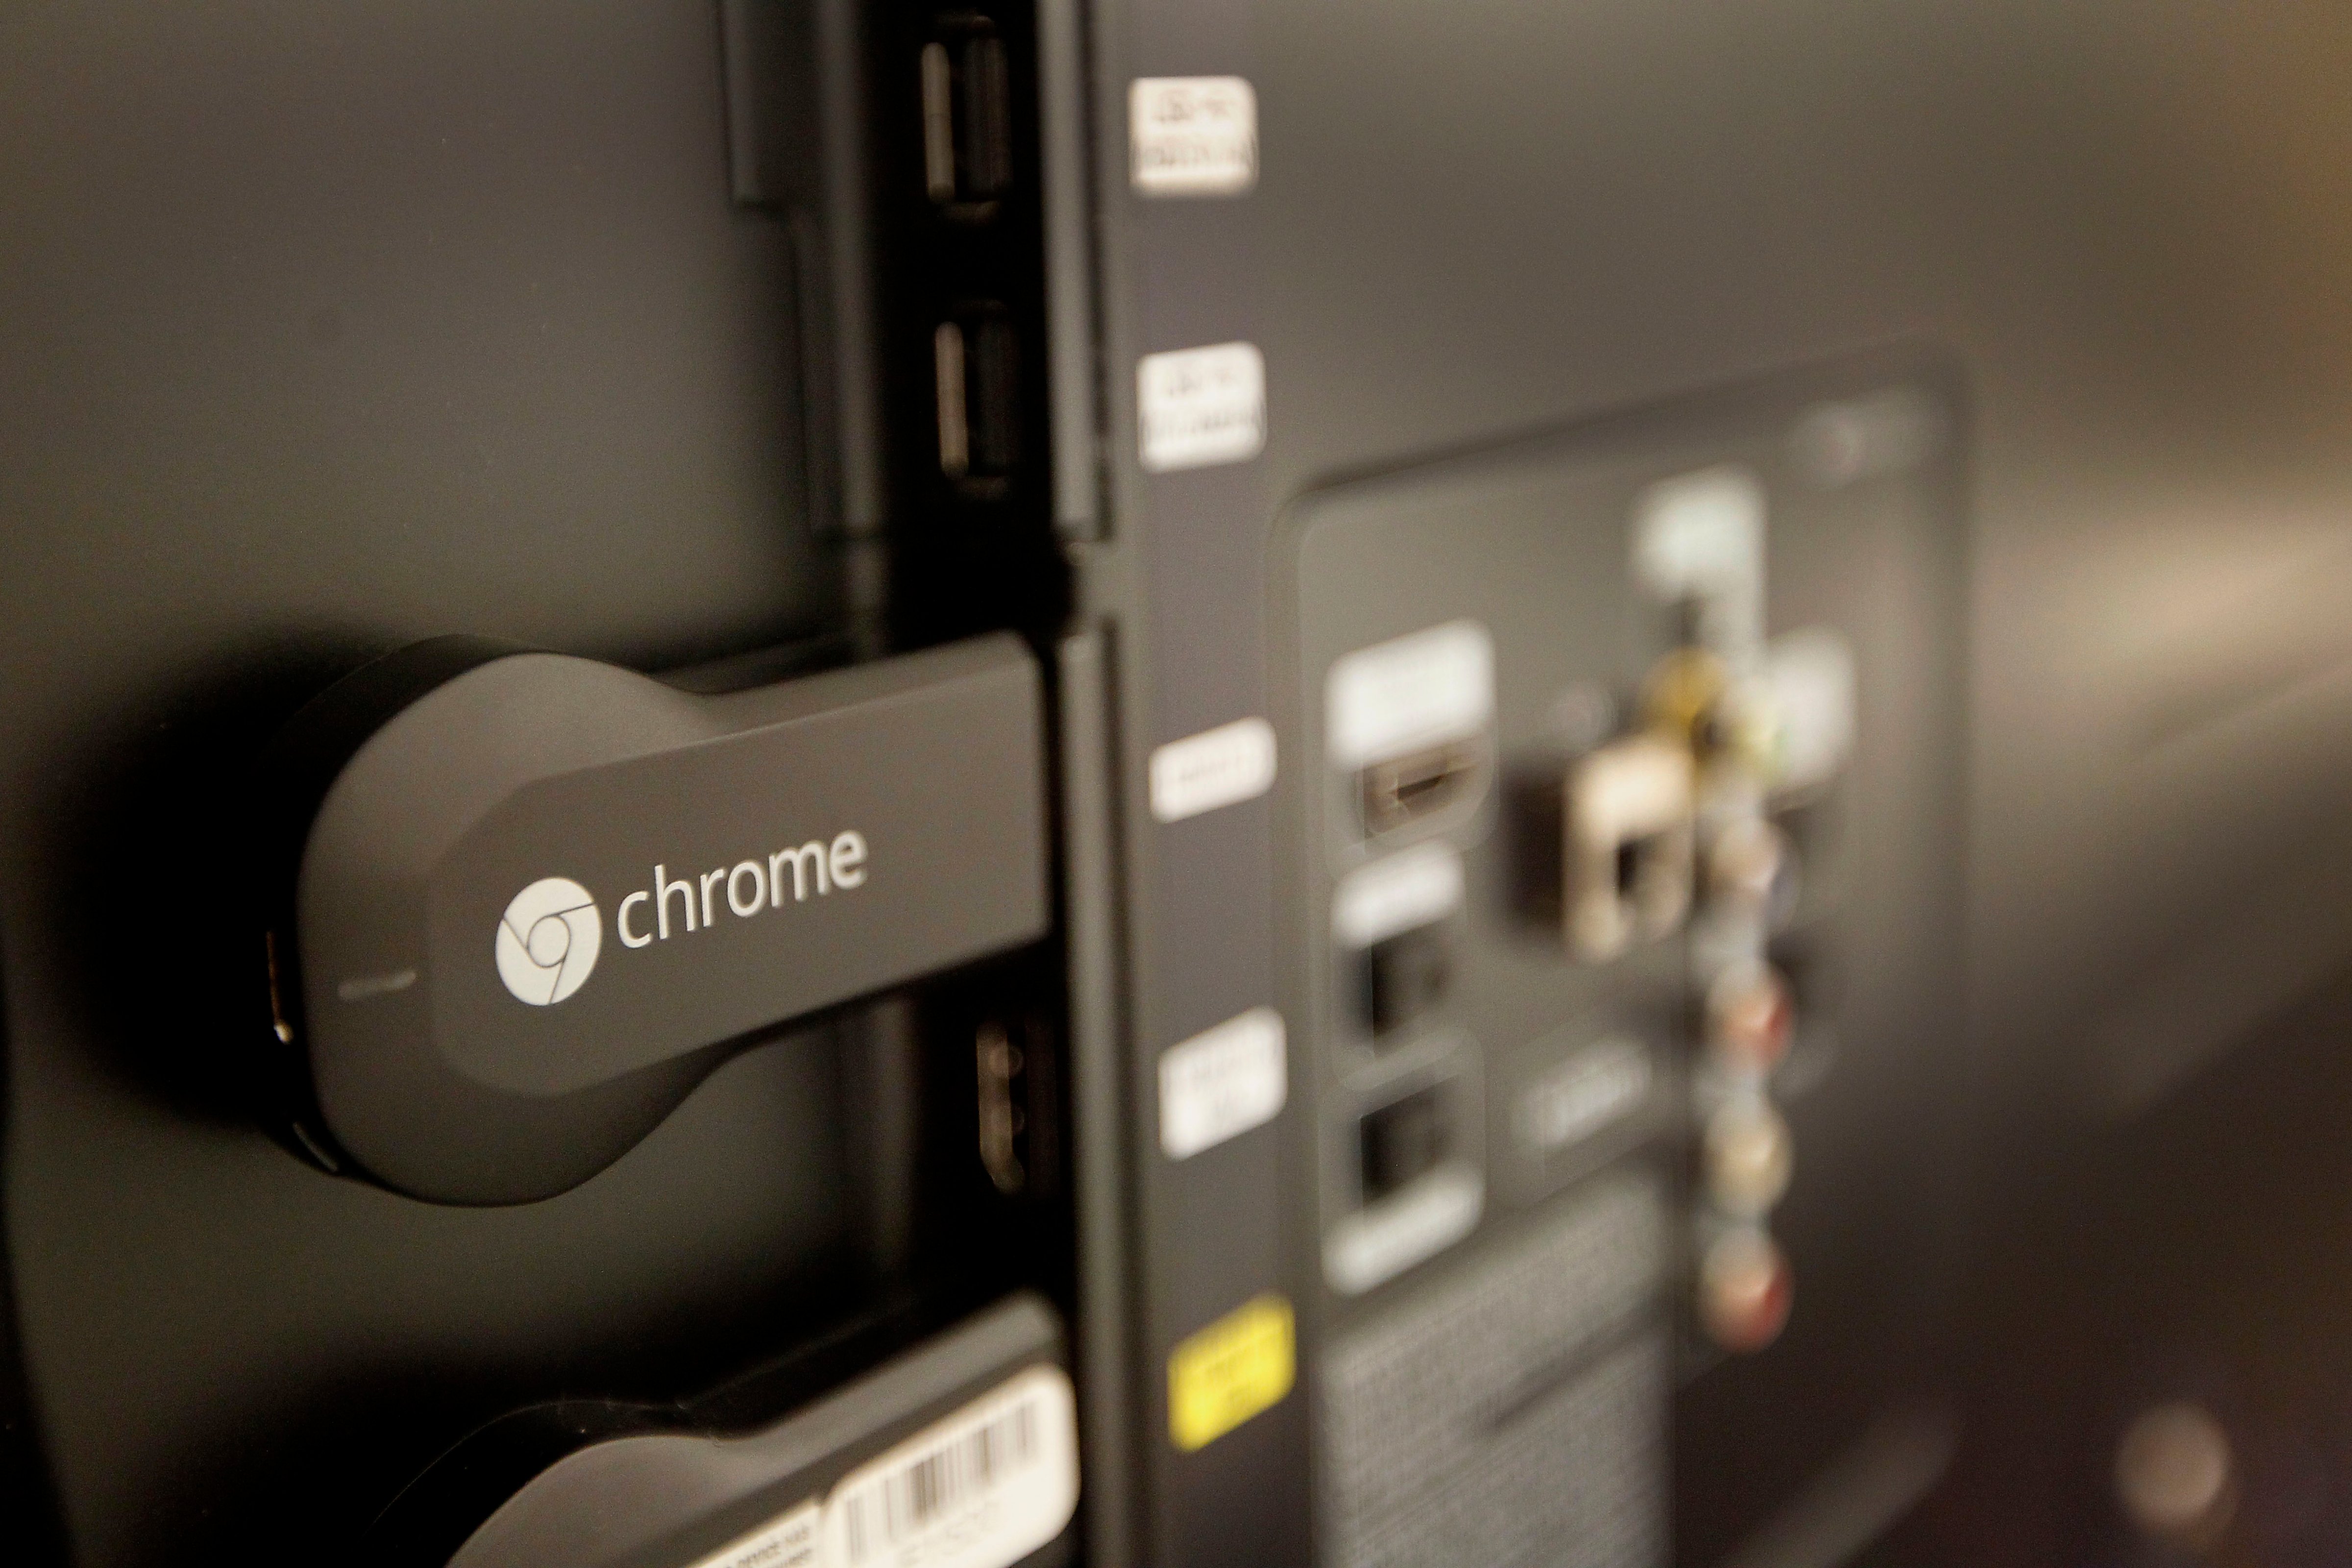 The new Google Chromecast is connected to the the back of a television during an event in San Francisco, California, U.S., on Wednesday, July 24, 2013. (Bloomberg&mdash;Bloomberg via Getty Images)